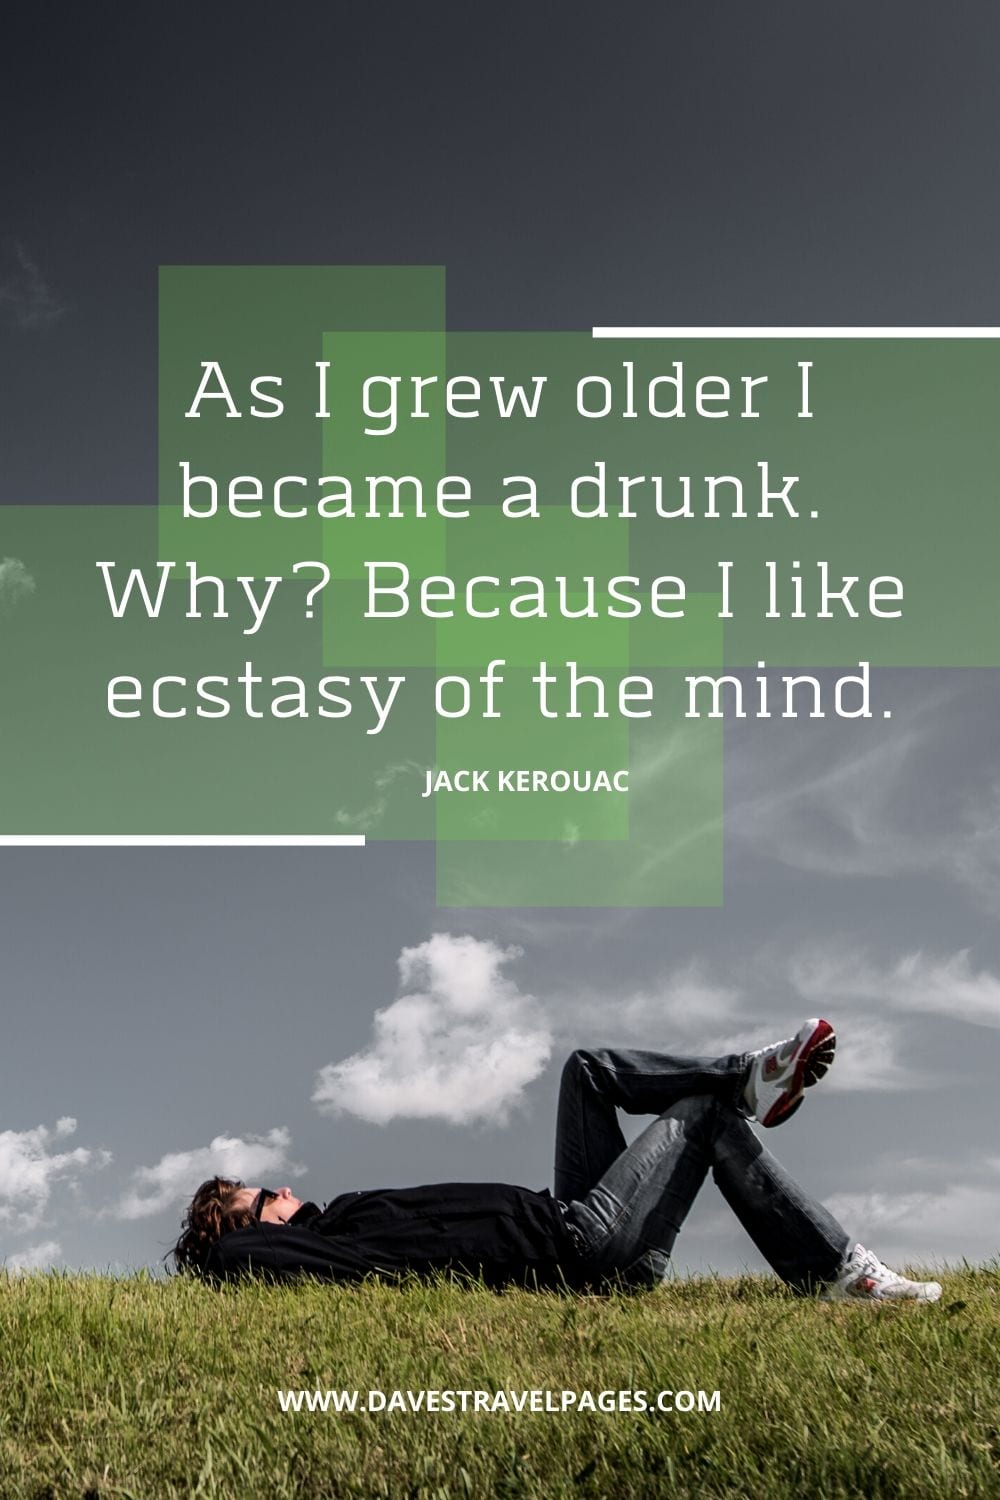 “As I grew older I became a drunk. Why? Because I like ecstasy of the mind.”